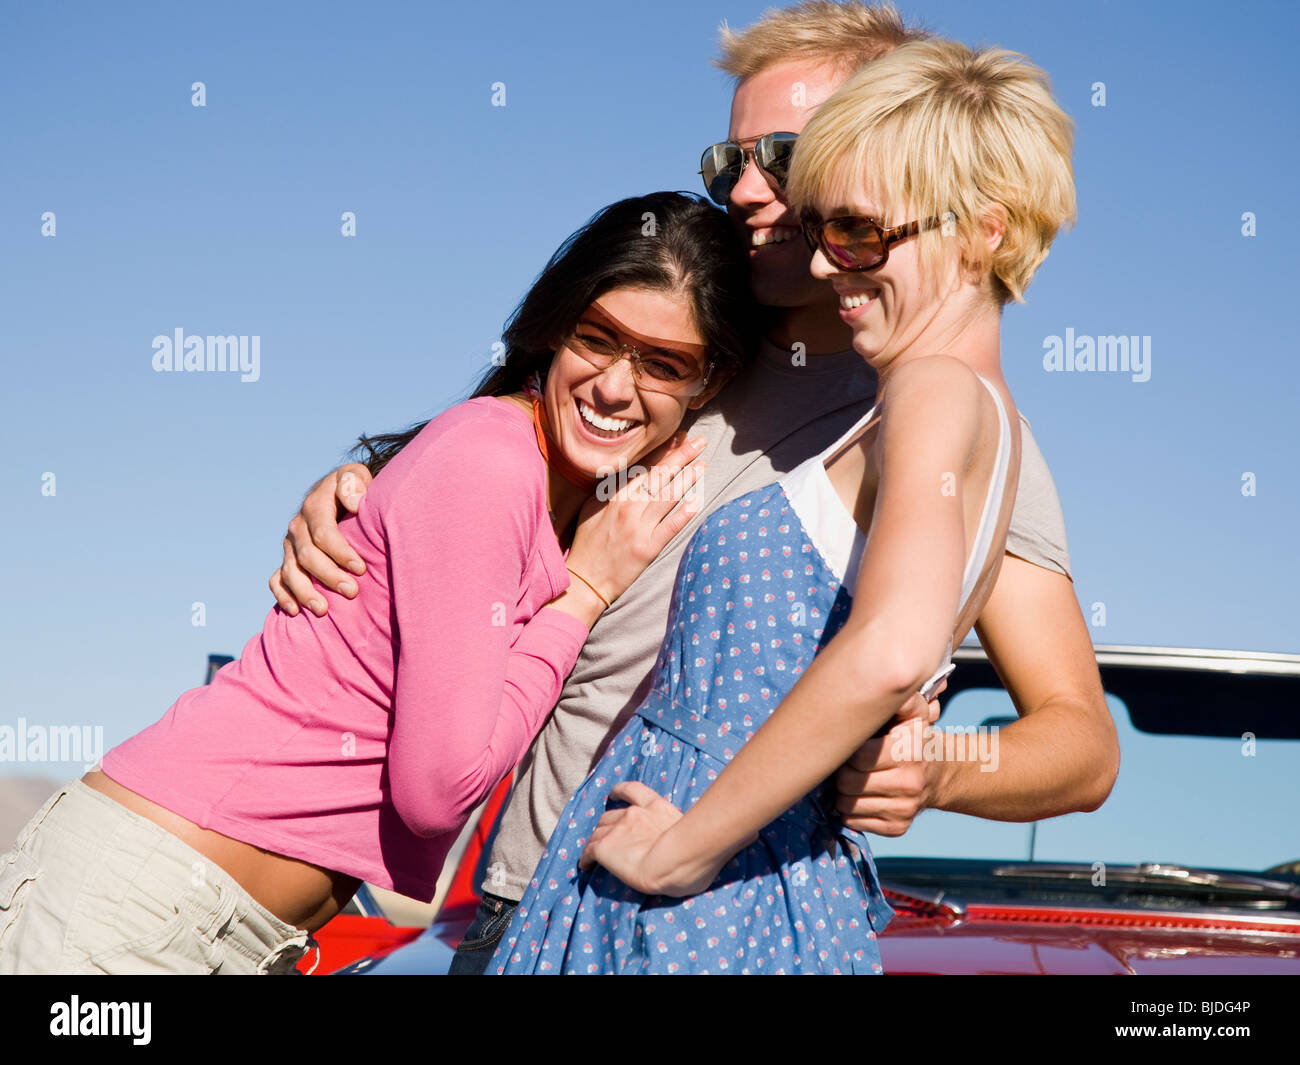 man and two women. Stock Photo